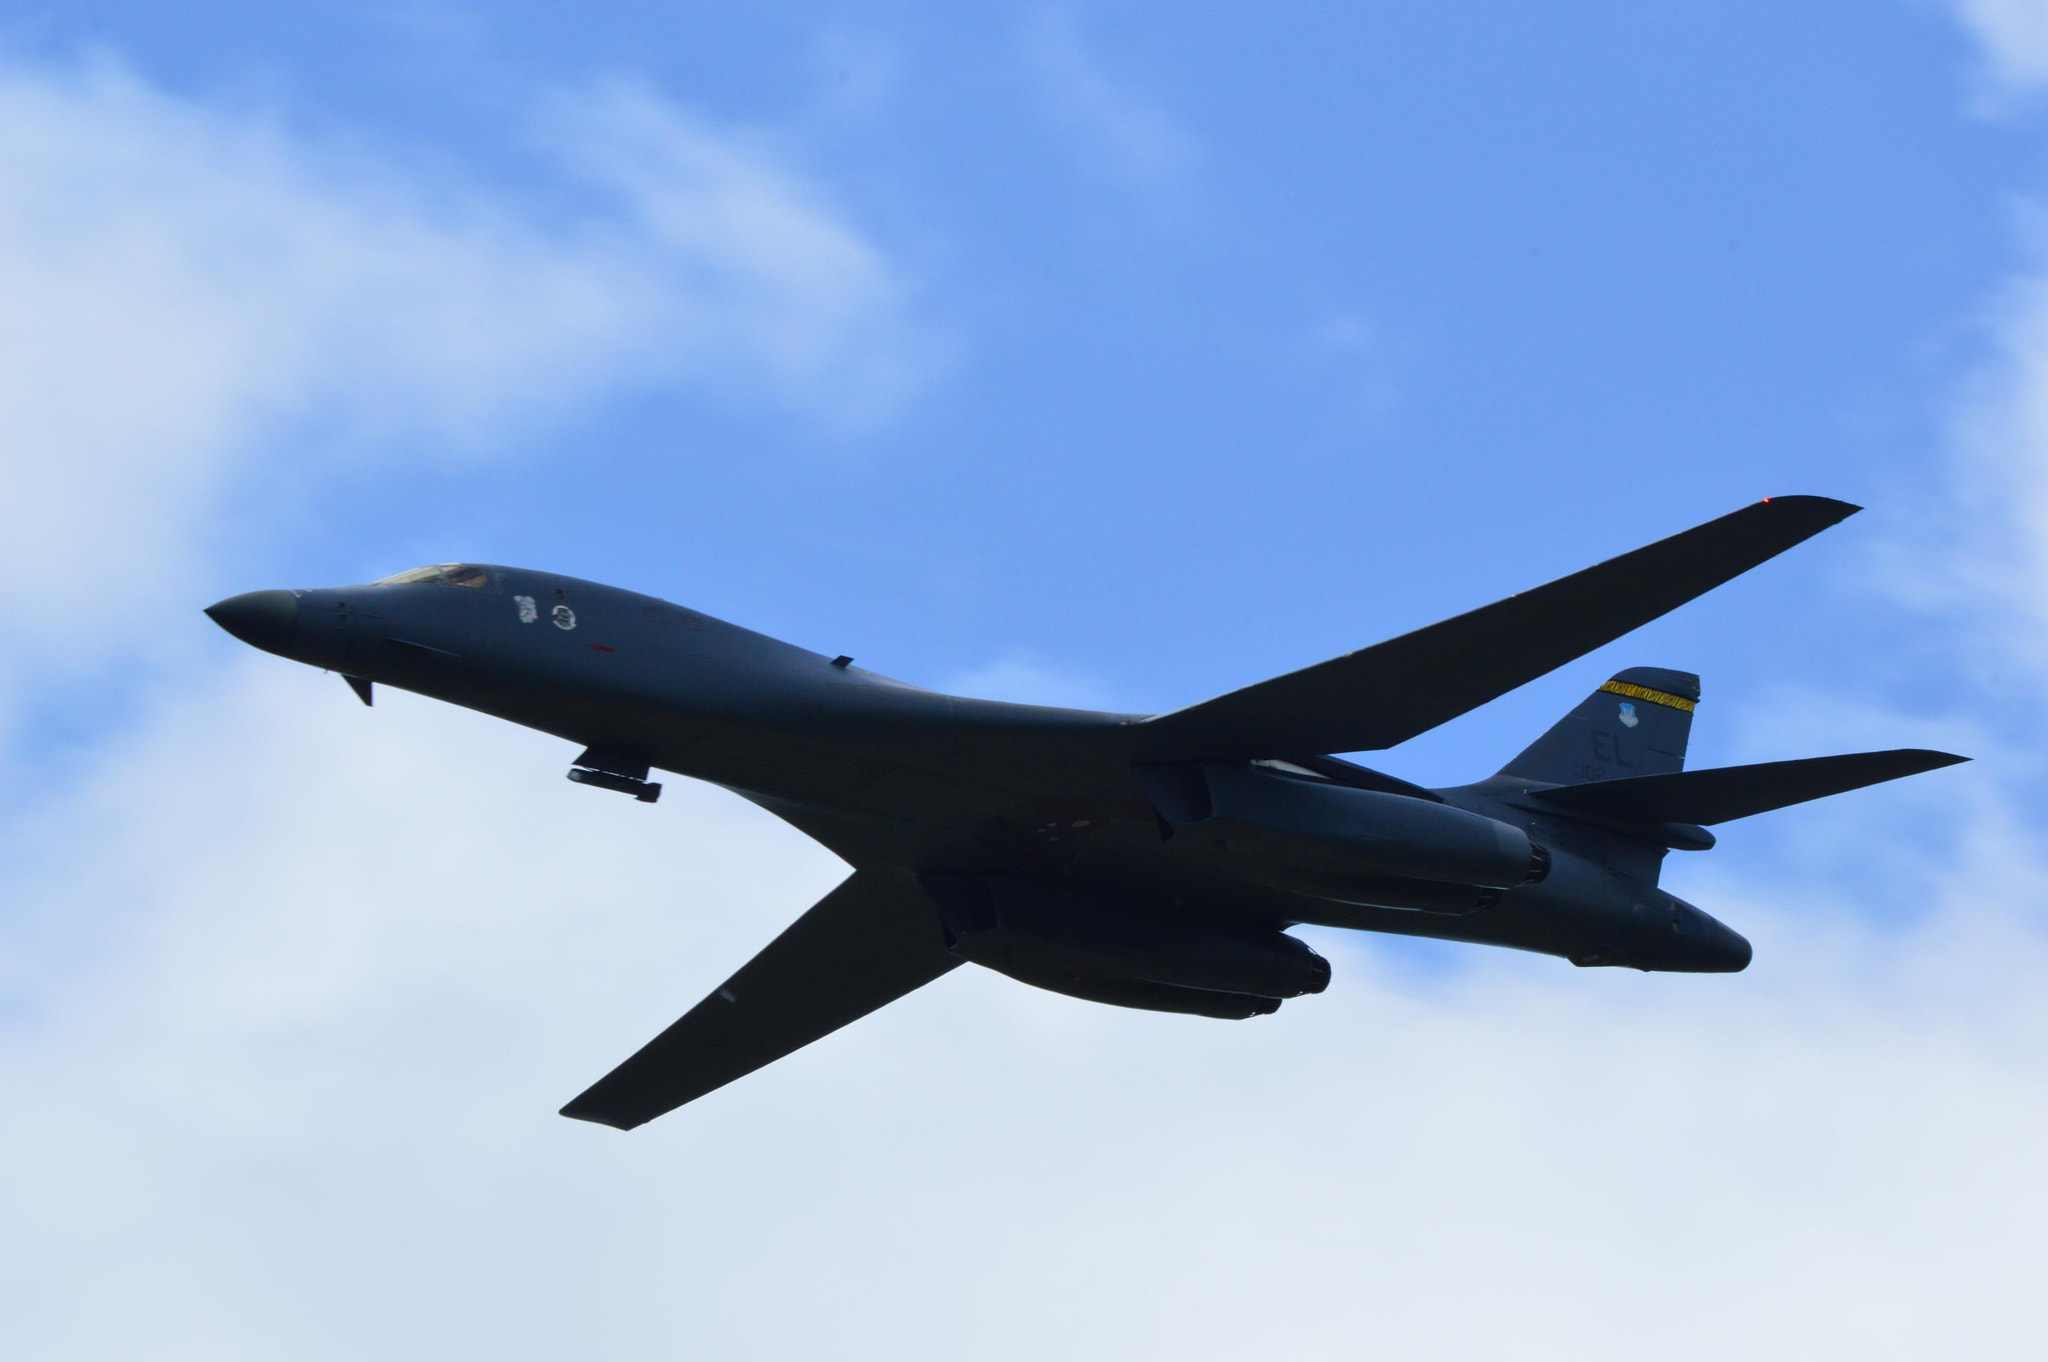 Nikon D3200 sample photo. B-1b lancer airshow flyby photography